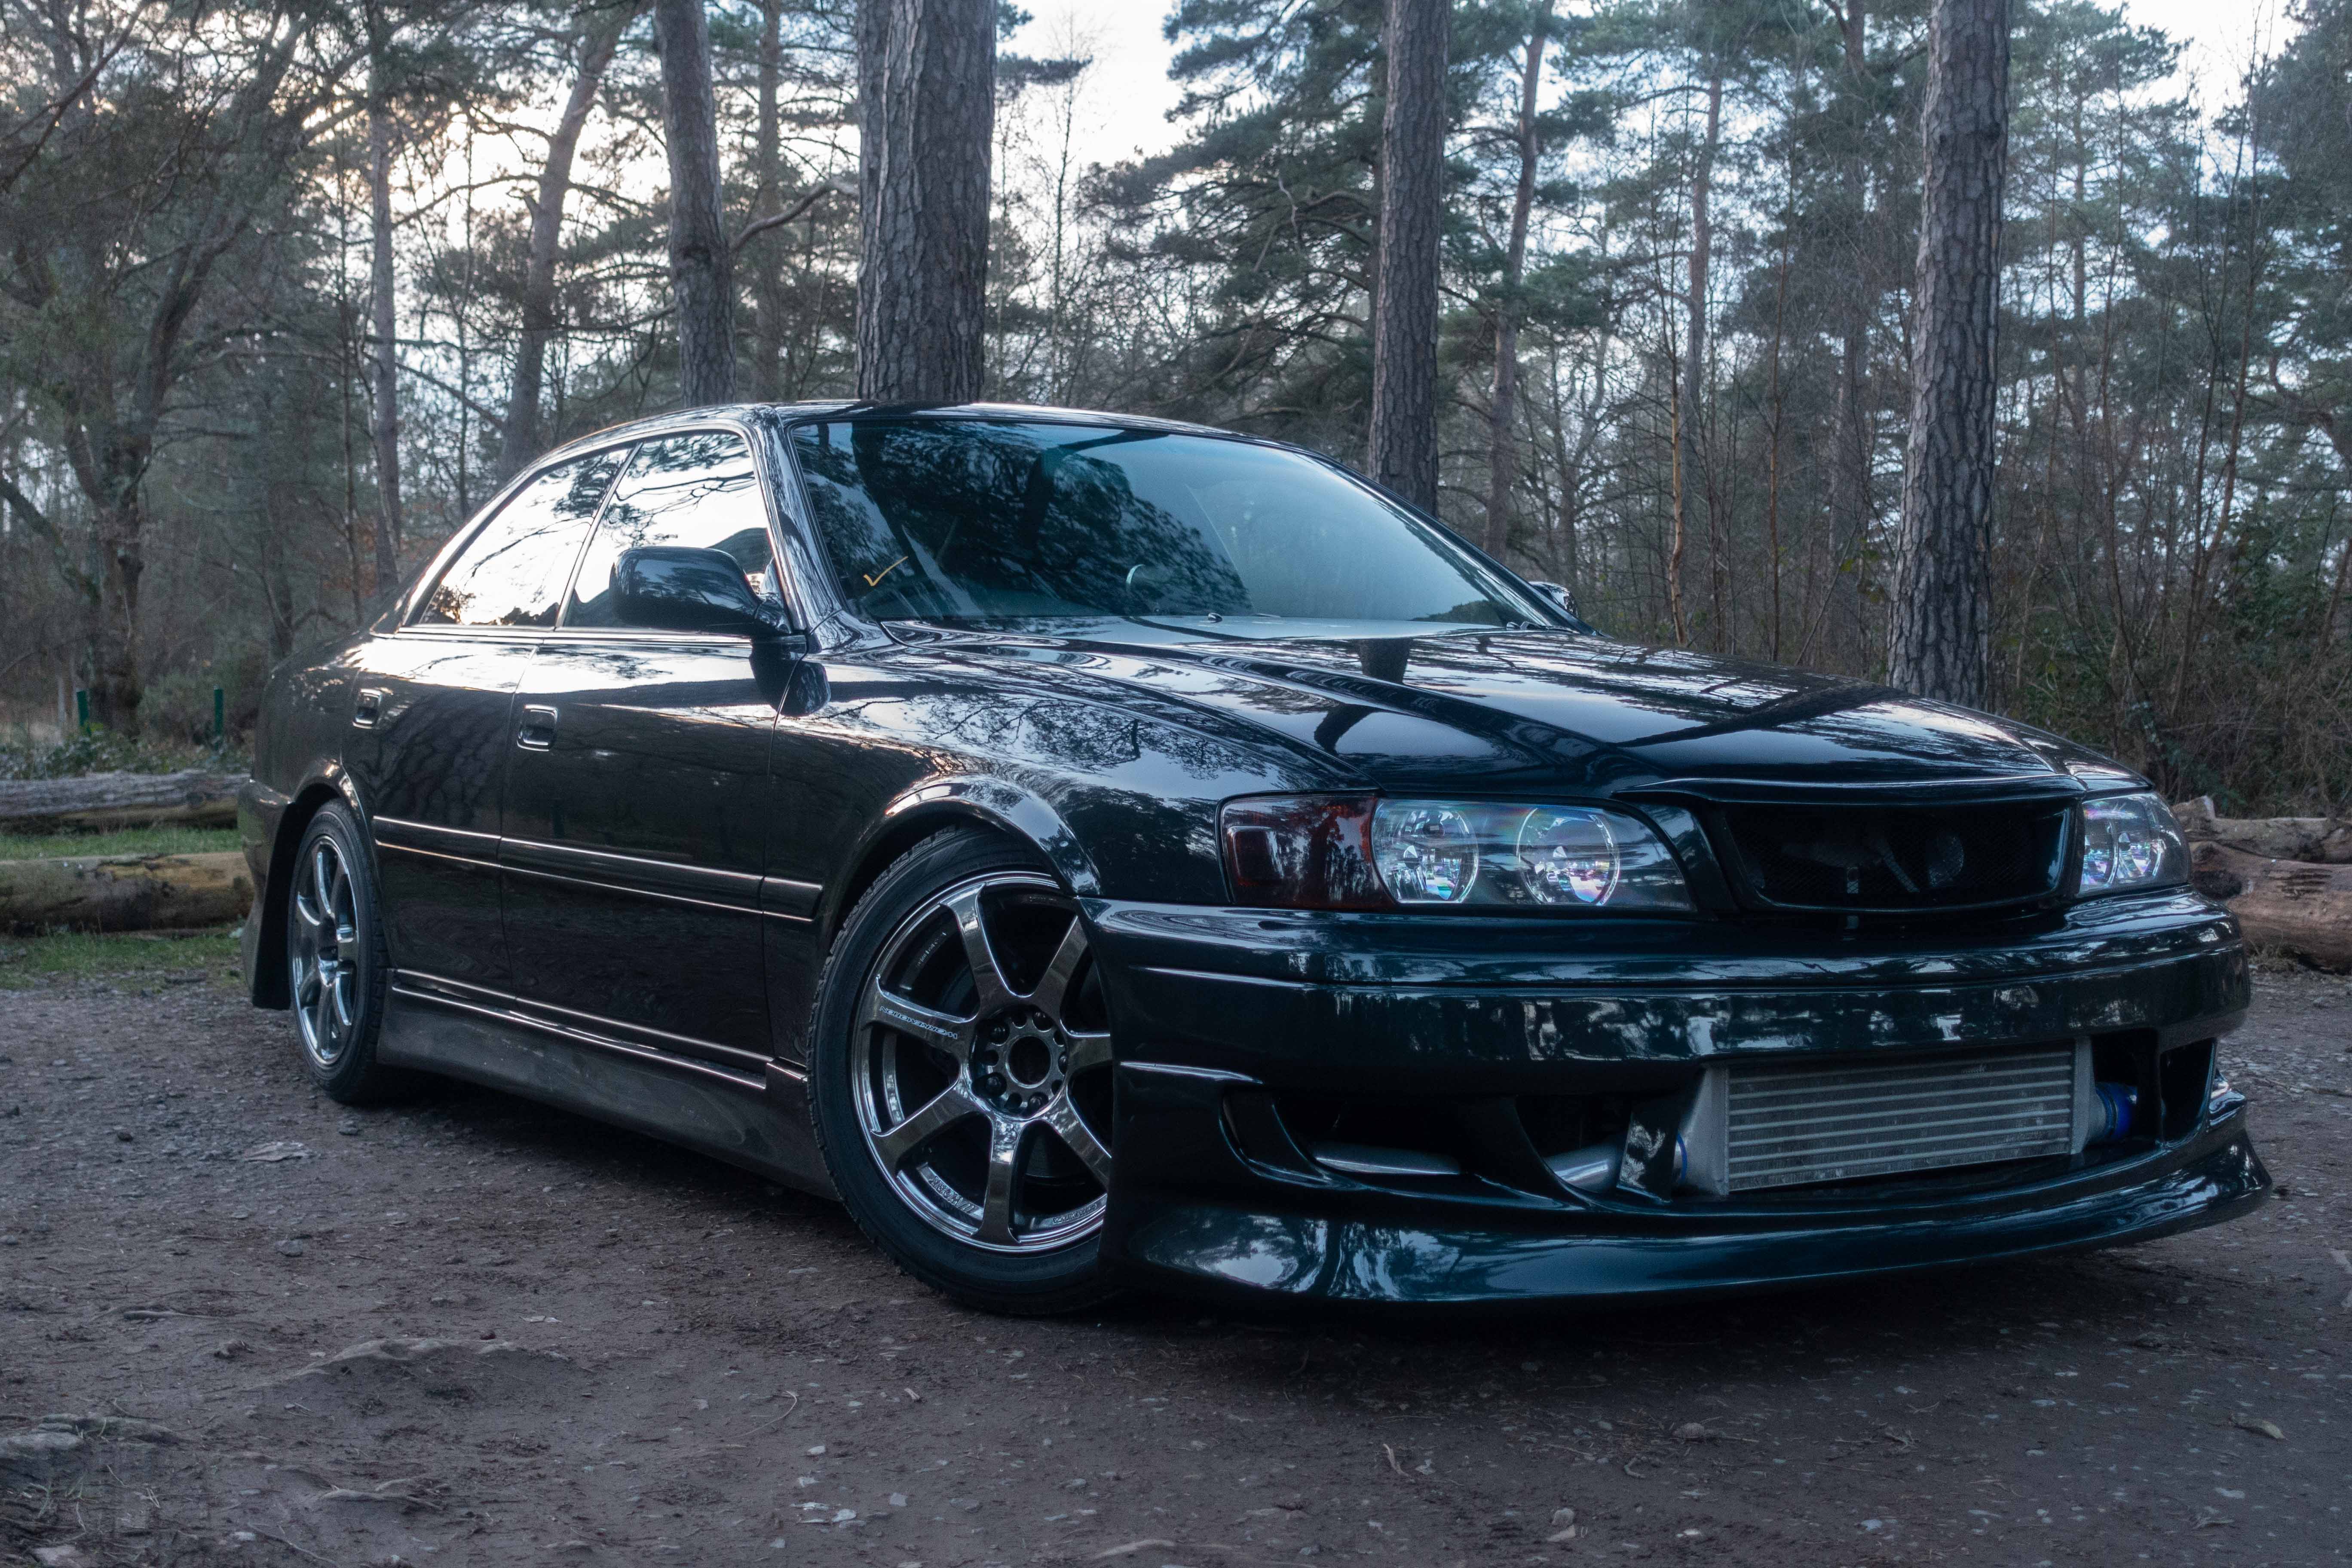 jzx100 for sale uk